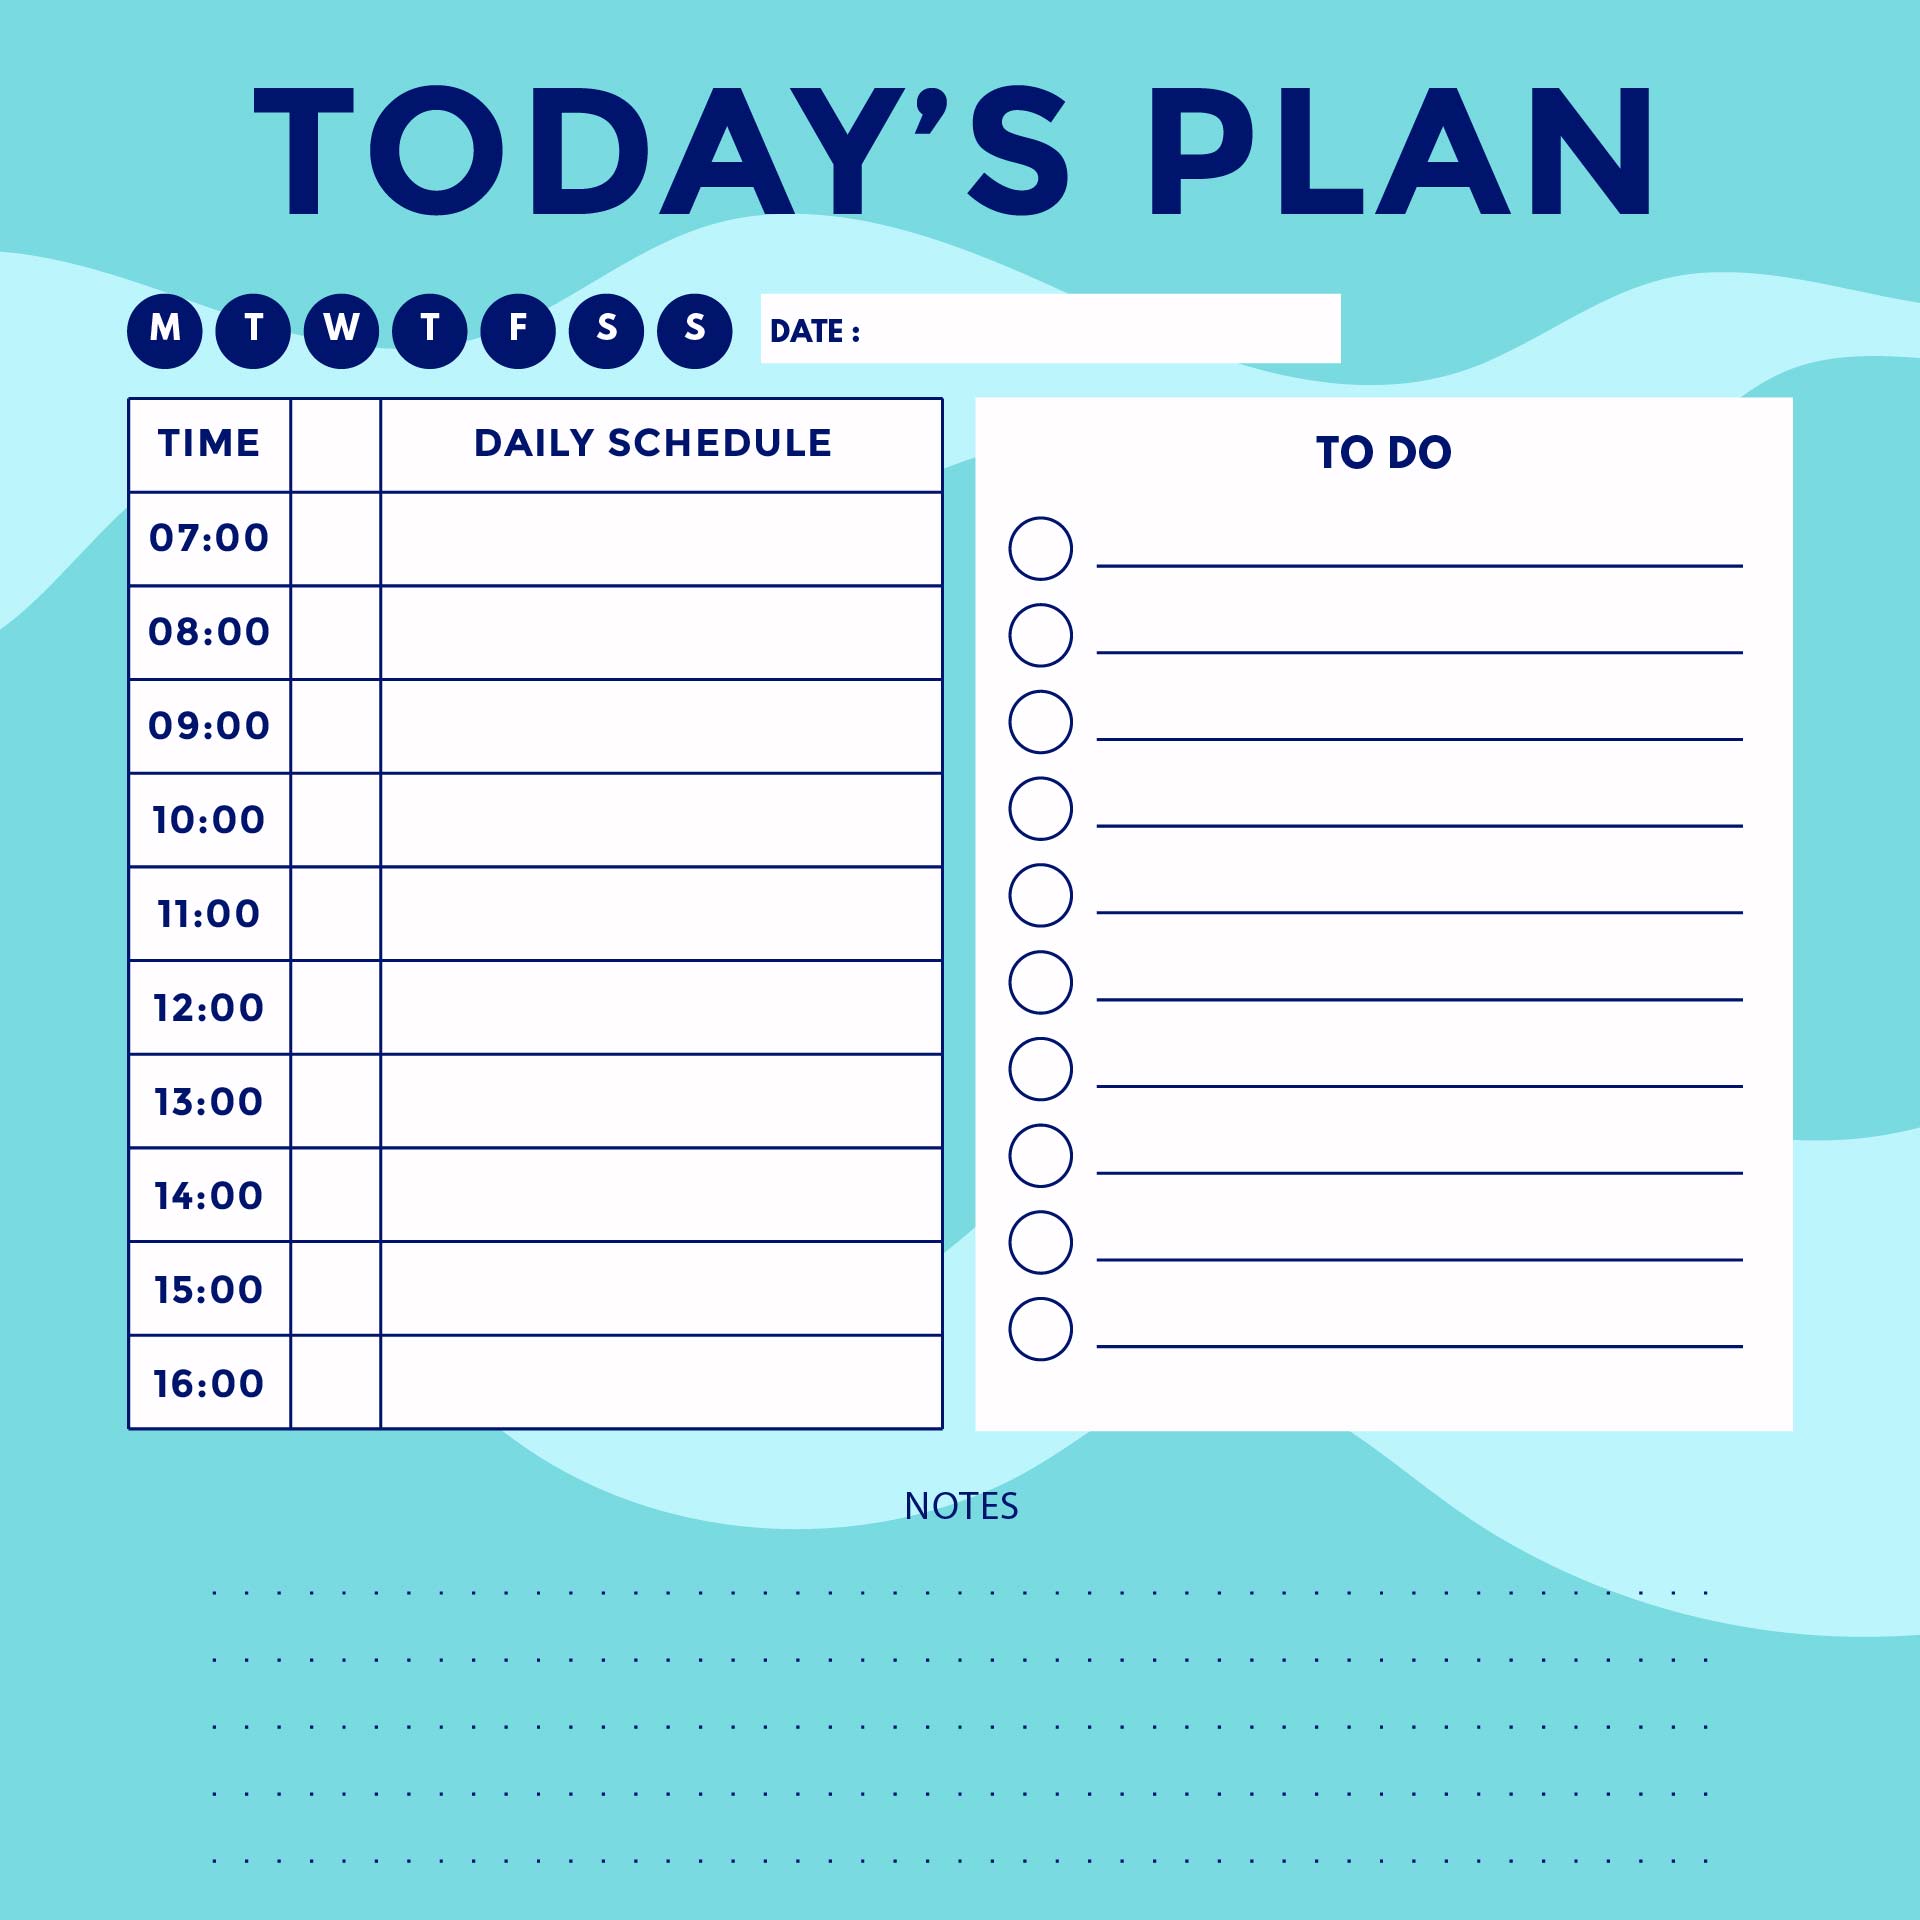 schedule-printable-images-gallery-category-page-4-printablee